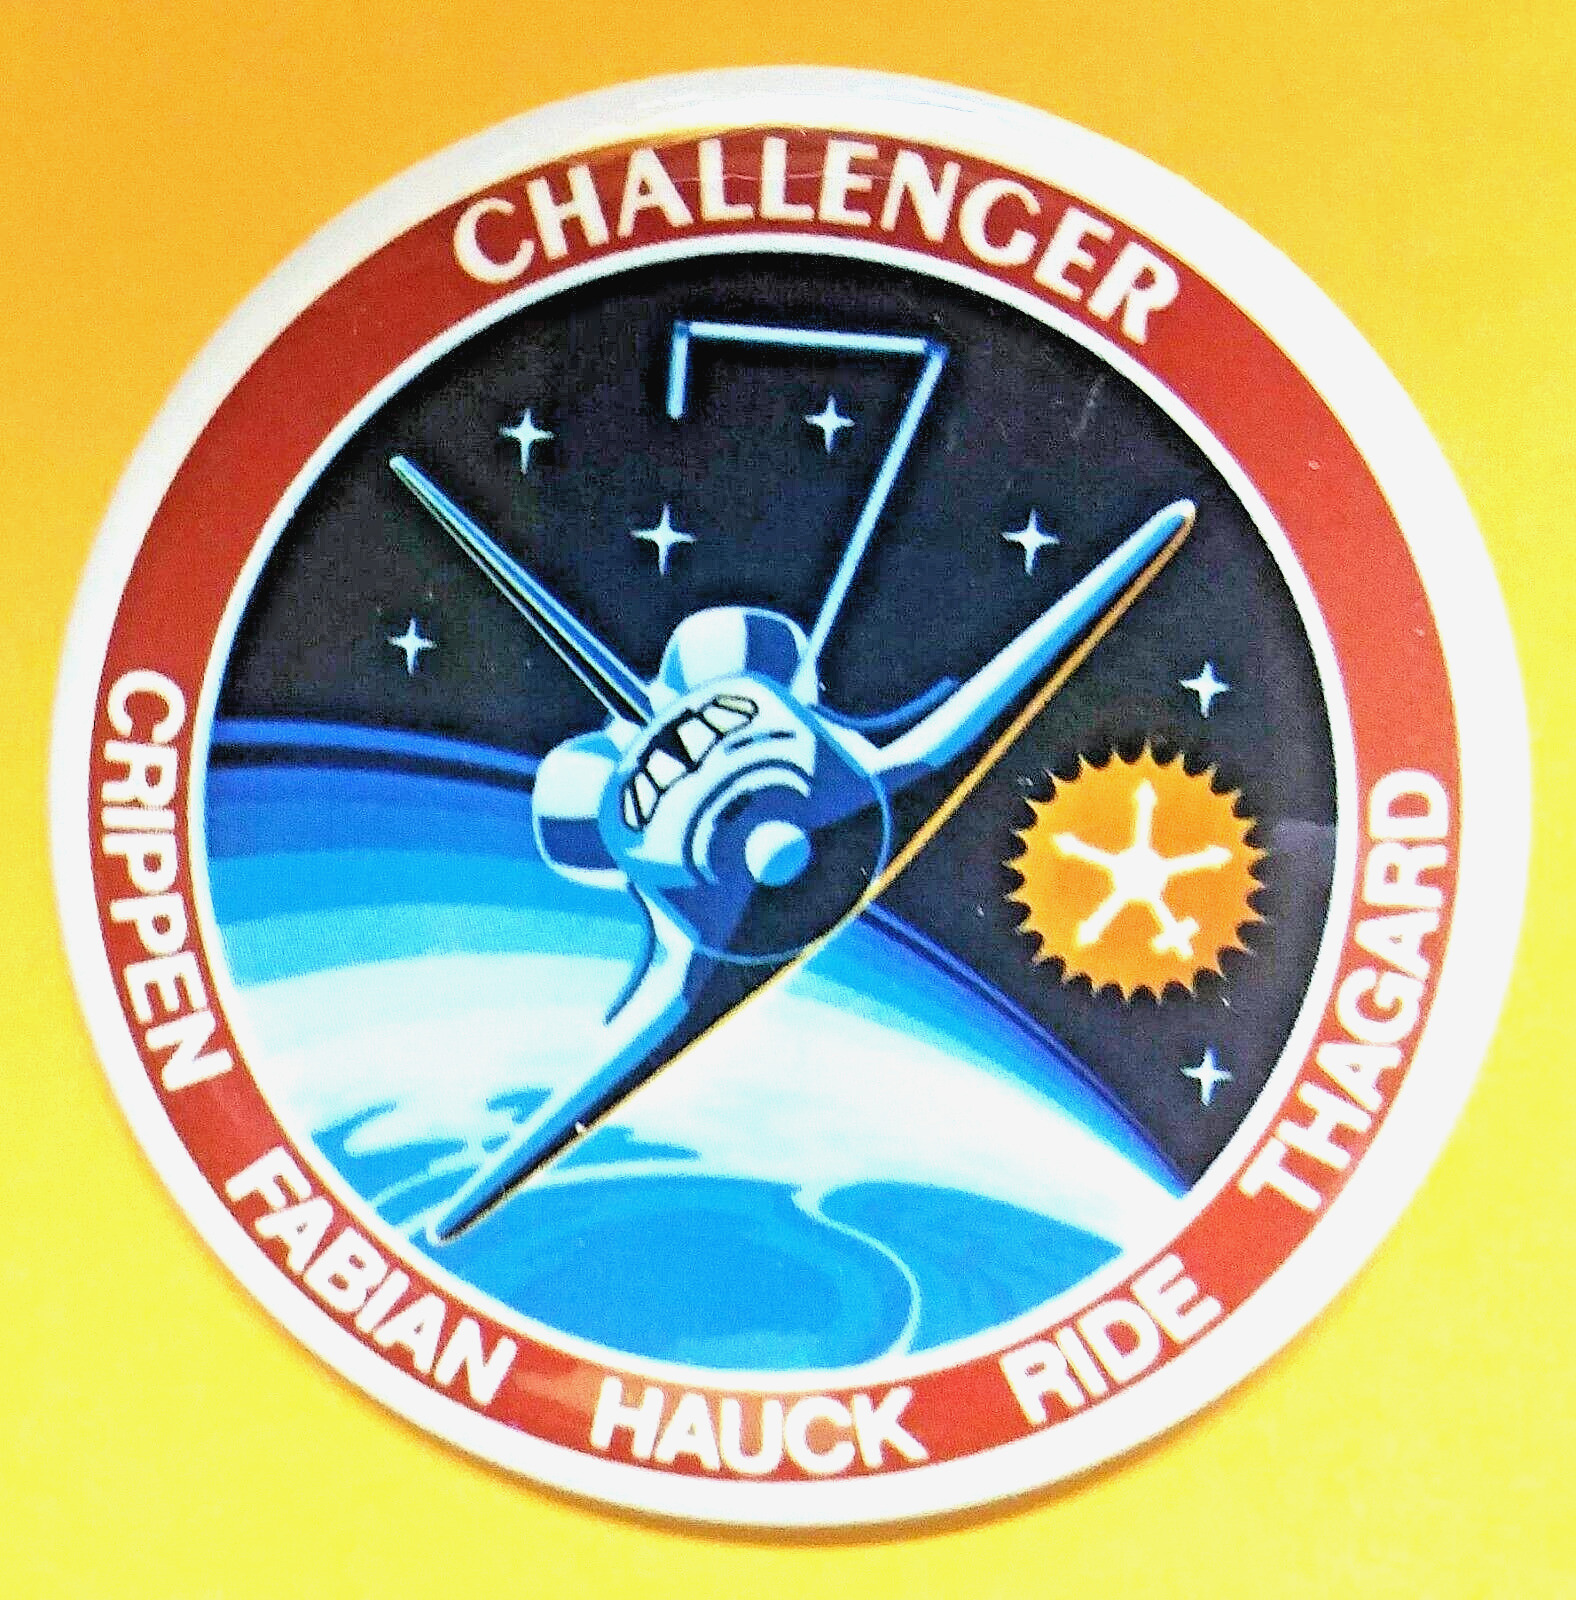 SPACE SHUTTLE CHALLENGER DISASTER - 1986 Sally Ride - NASA Launch Pinback Button